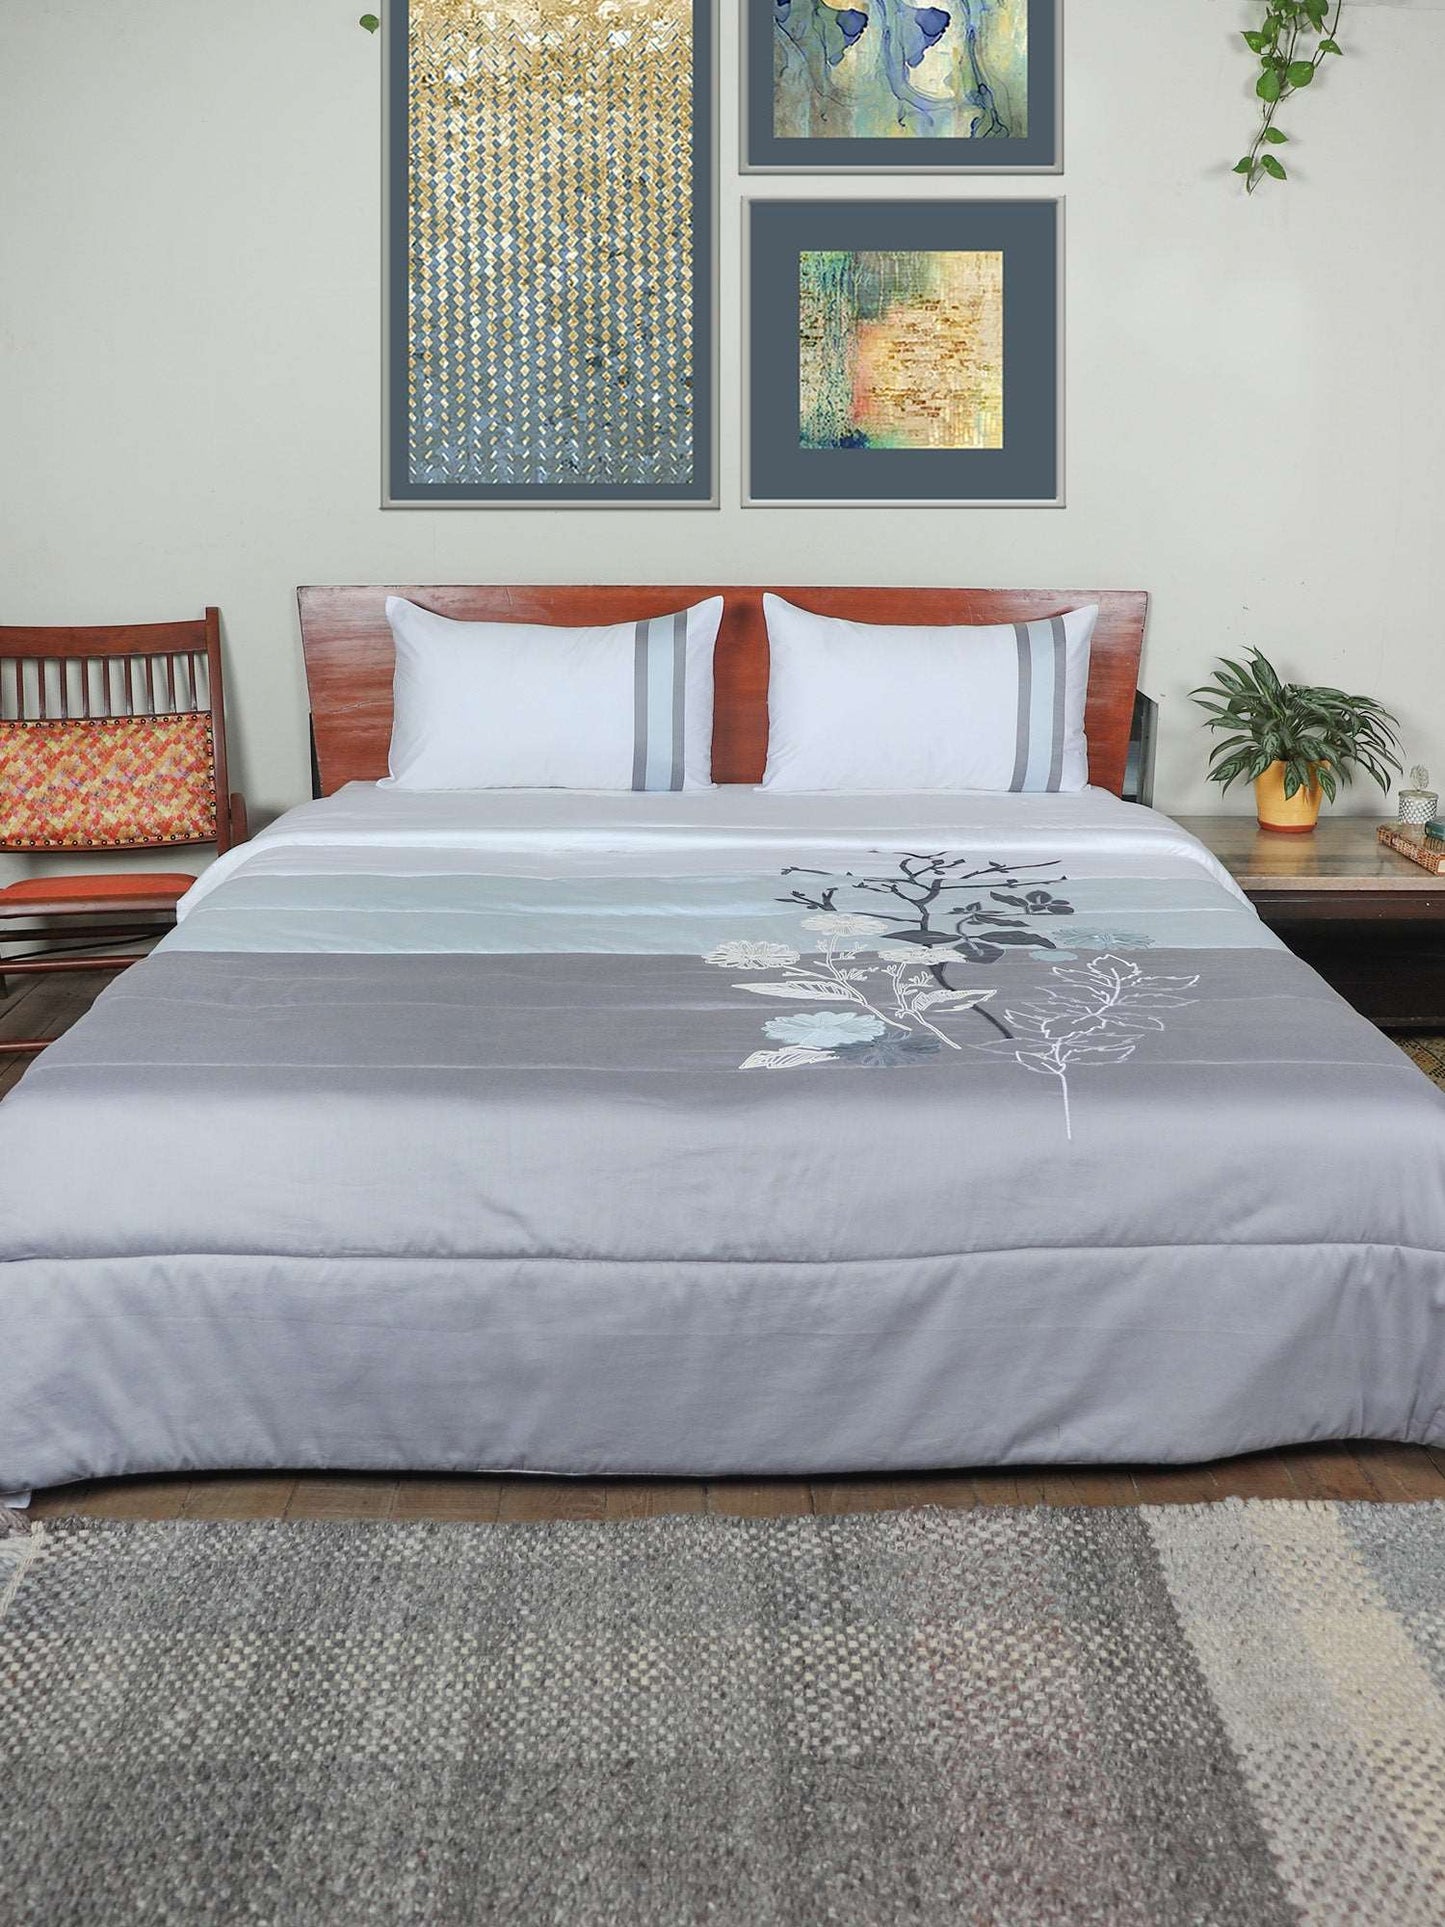 Grey blue colored embroidered bed quilt /comforter with 2 matching pillow covers made from polyester front and cotton backed quilt for king size double bed 